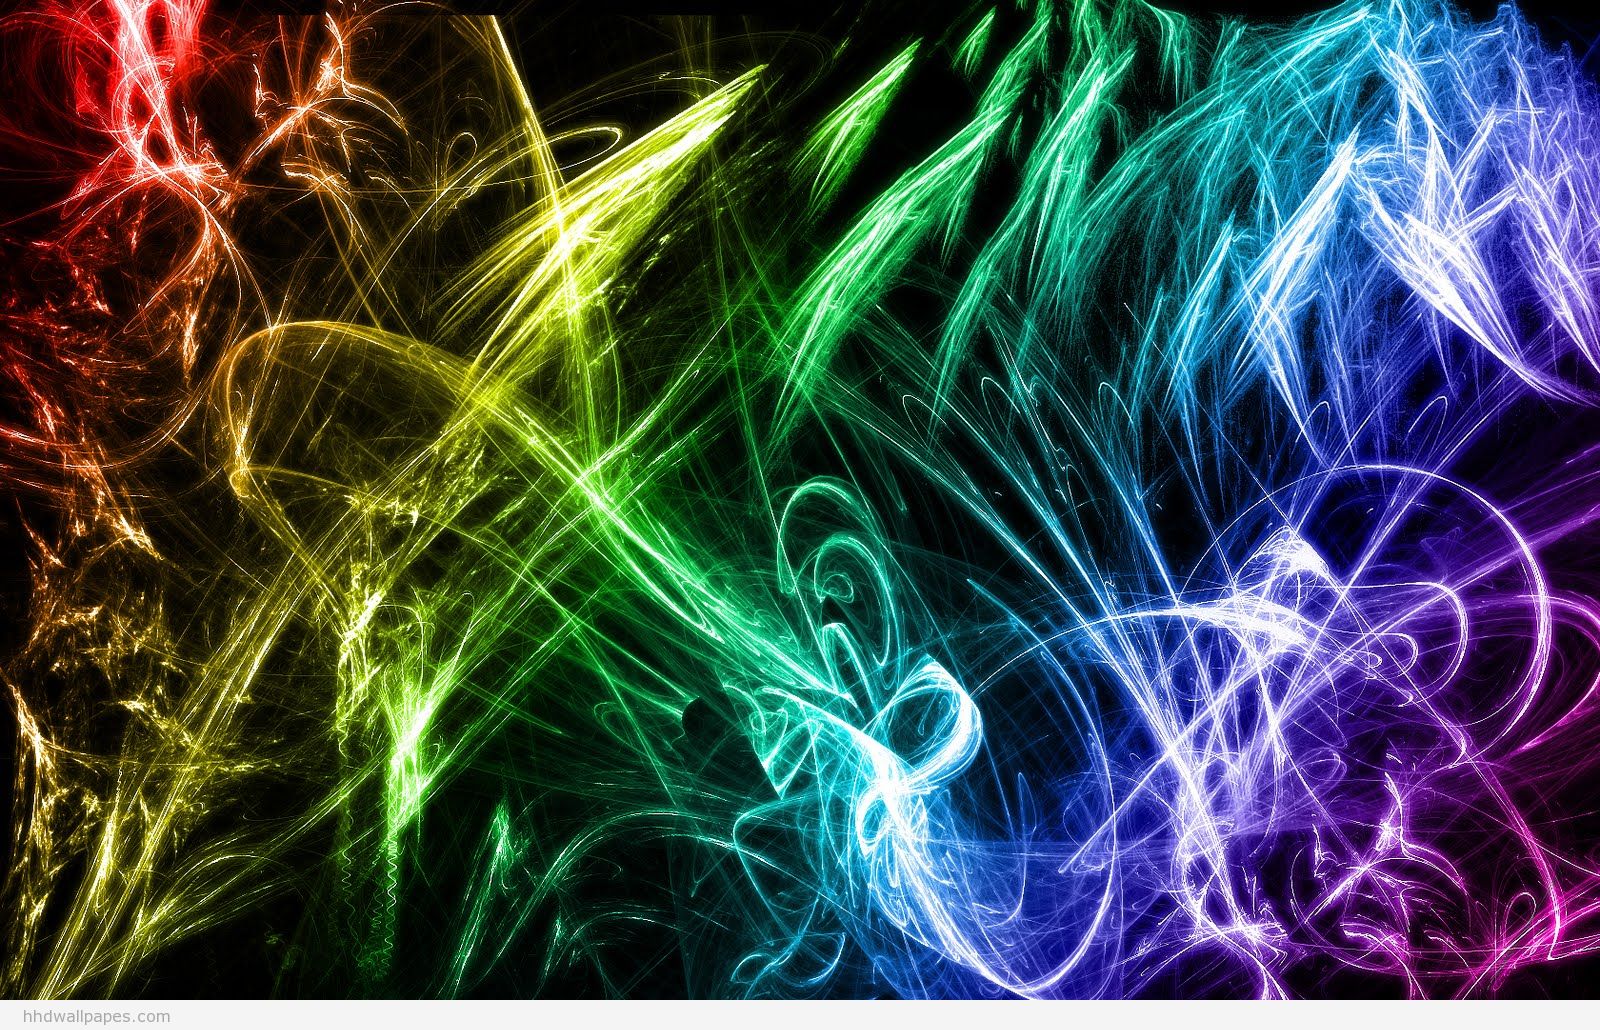 HD Wallpapers Colorful Abstract Desktop Backgrounds Most Beautiful